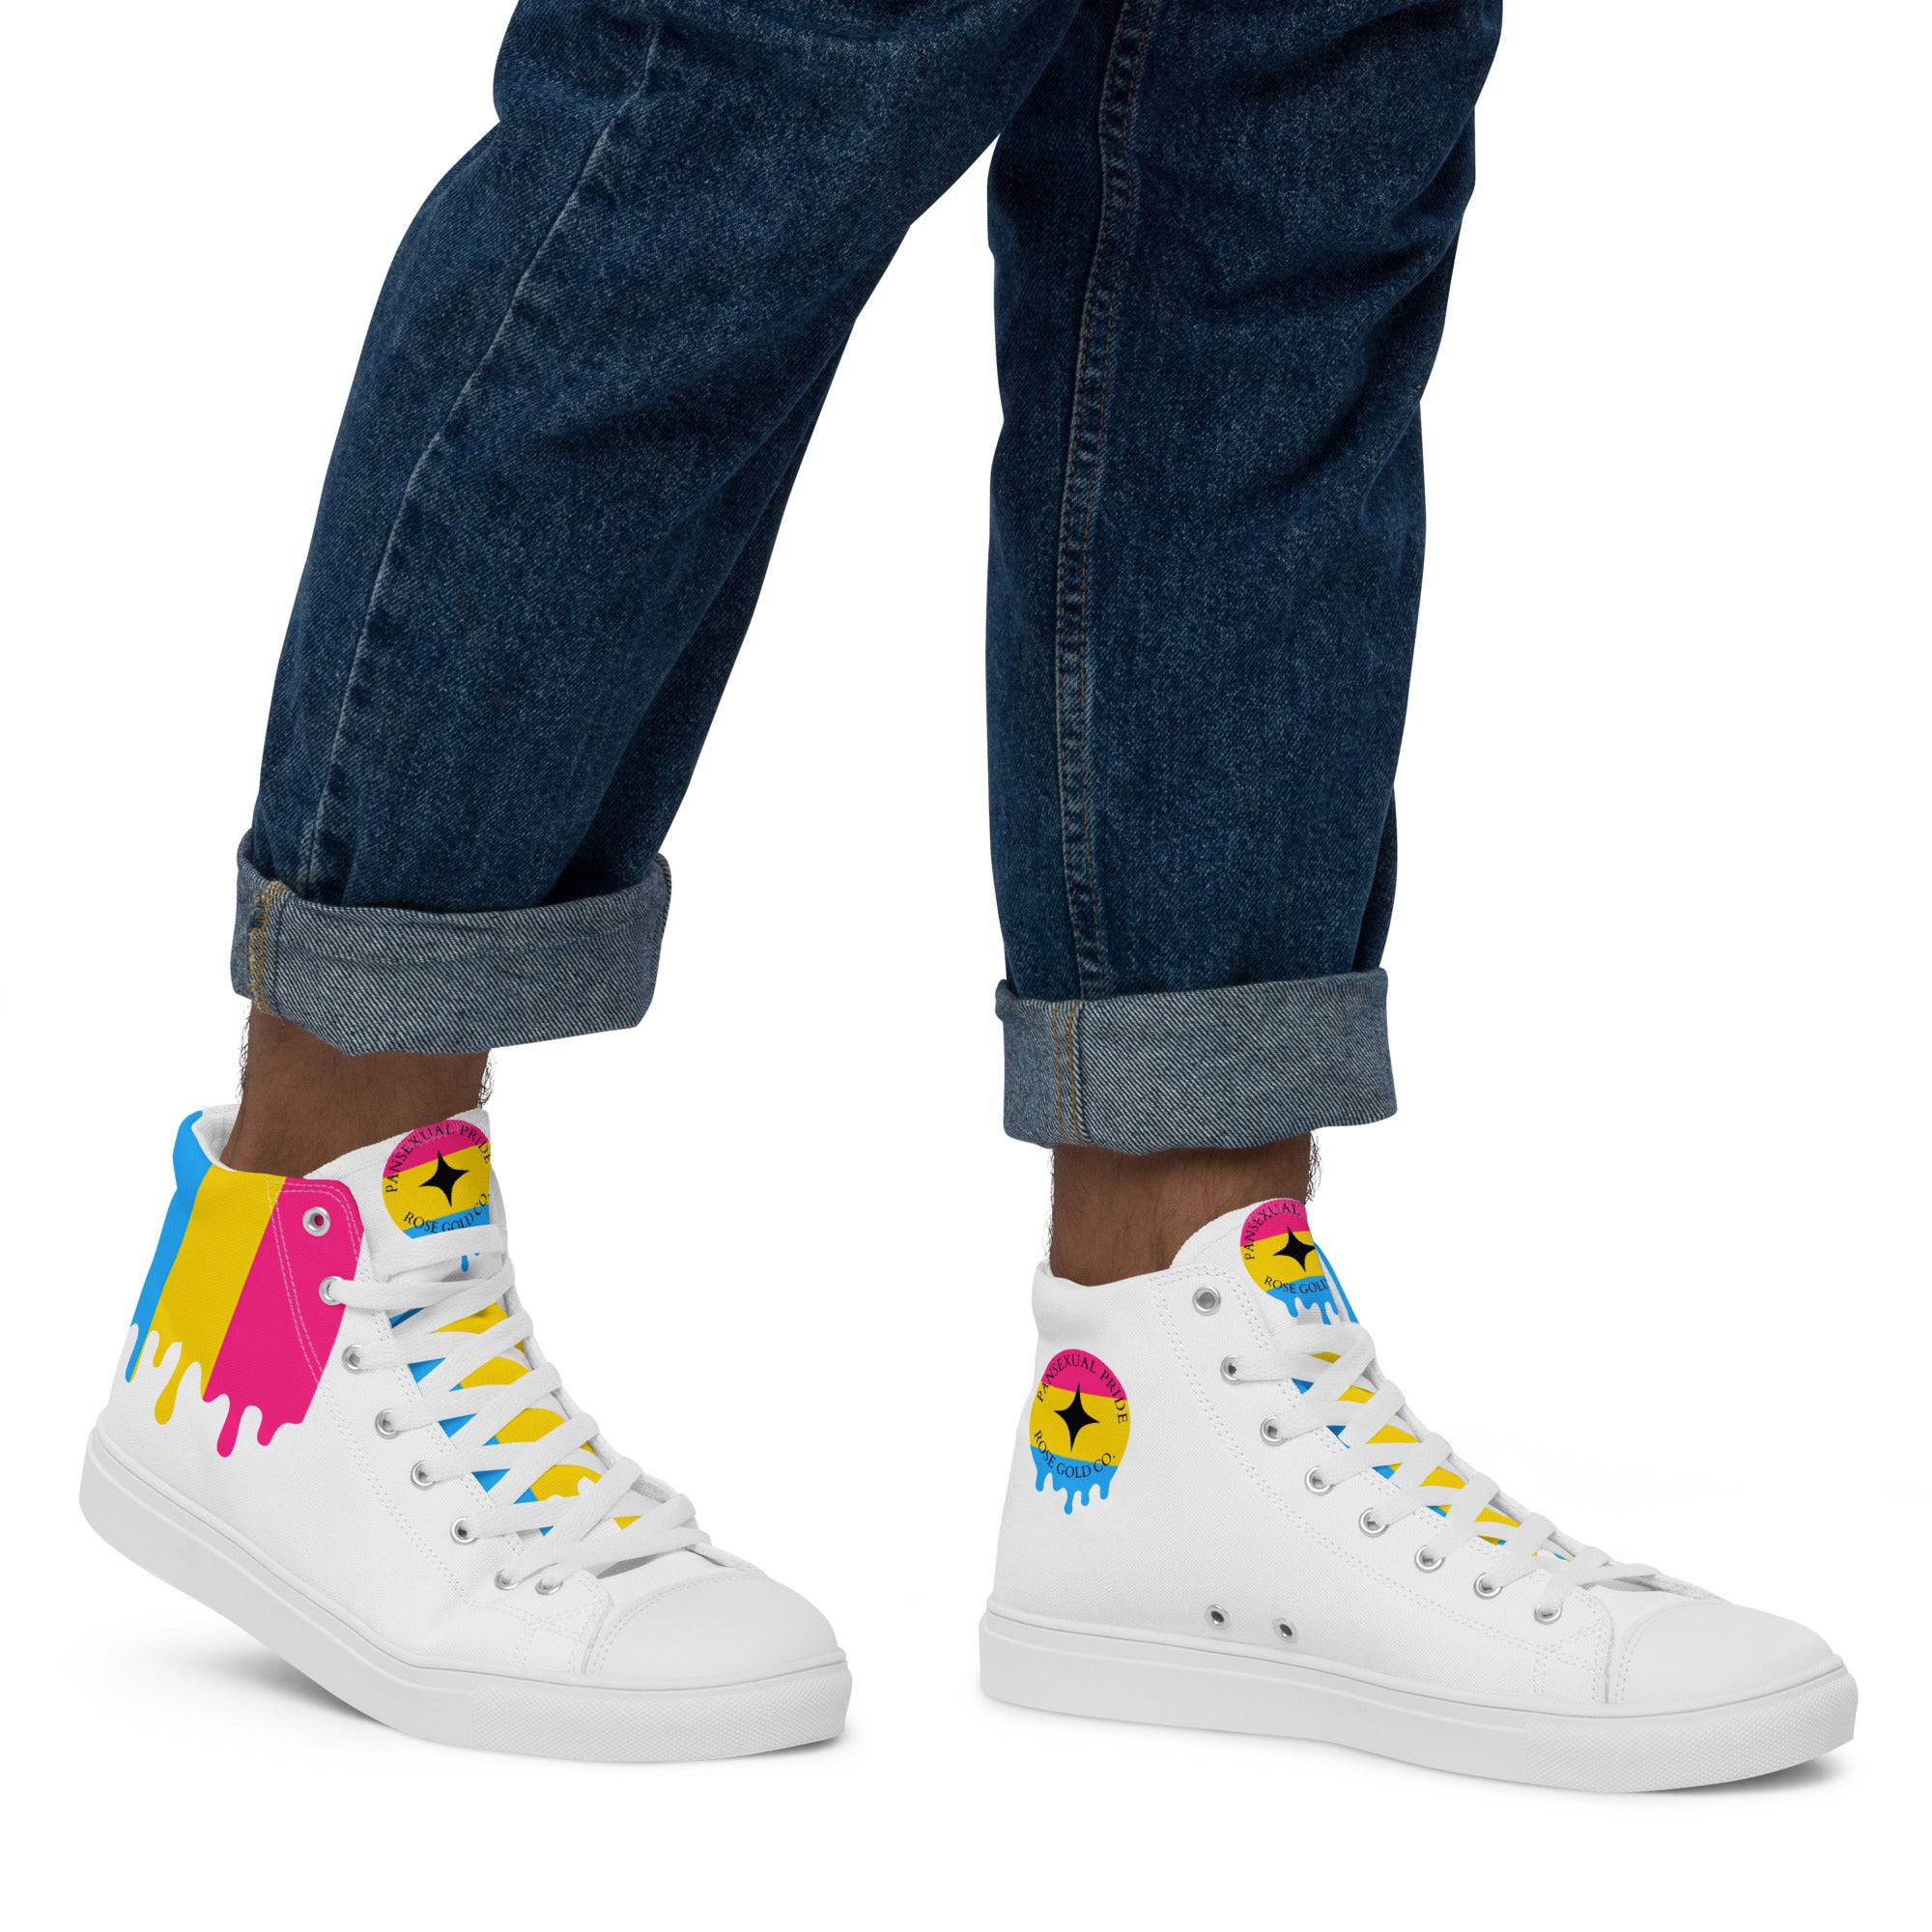 Pansexual Pride Men’s high top shoes